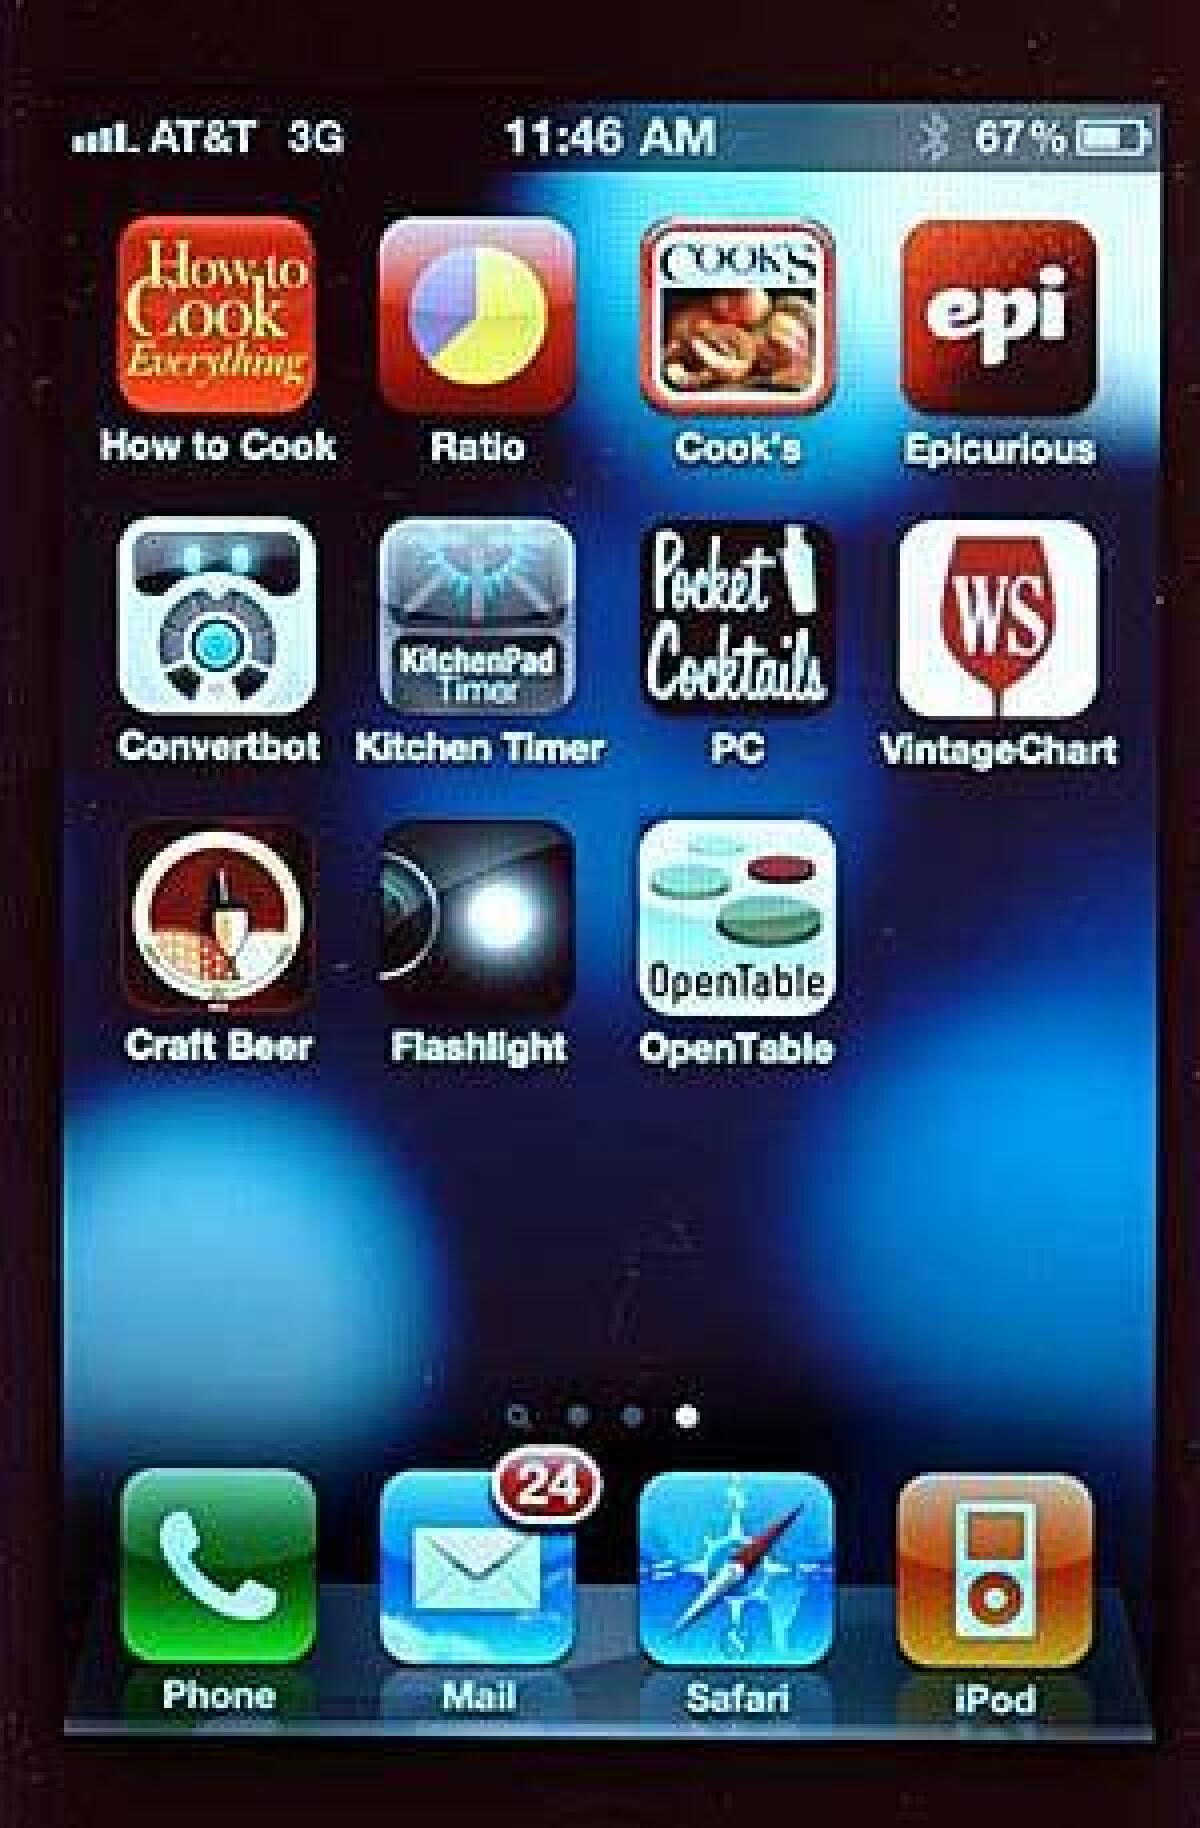 These are a few of her favorite apps: S. Irene Virbila winnowed down the ones she found most useful.